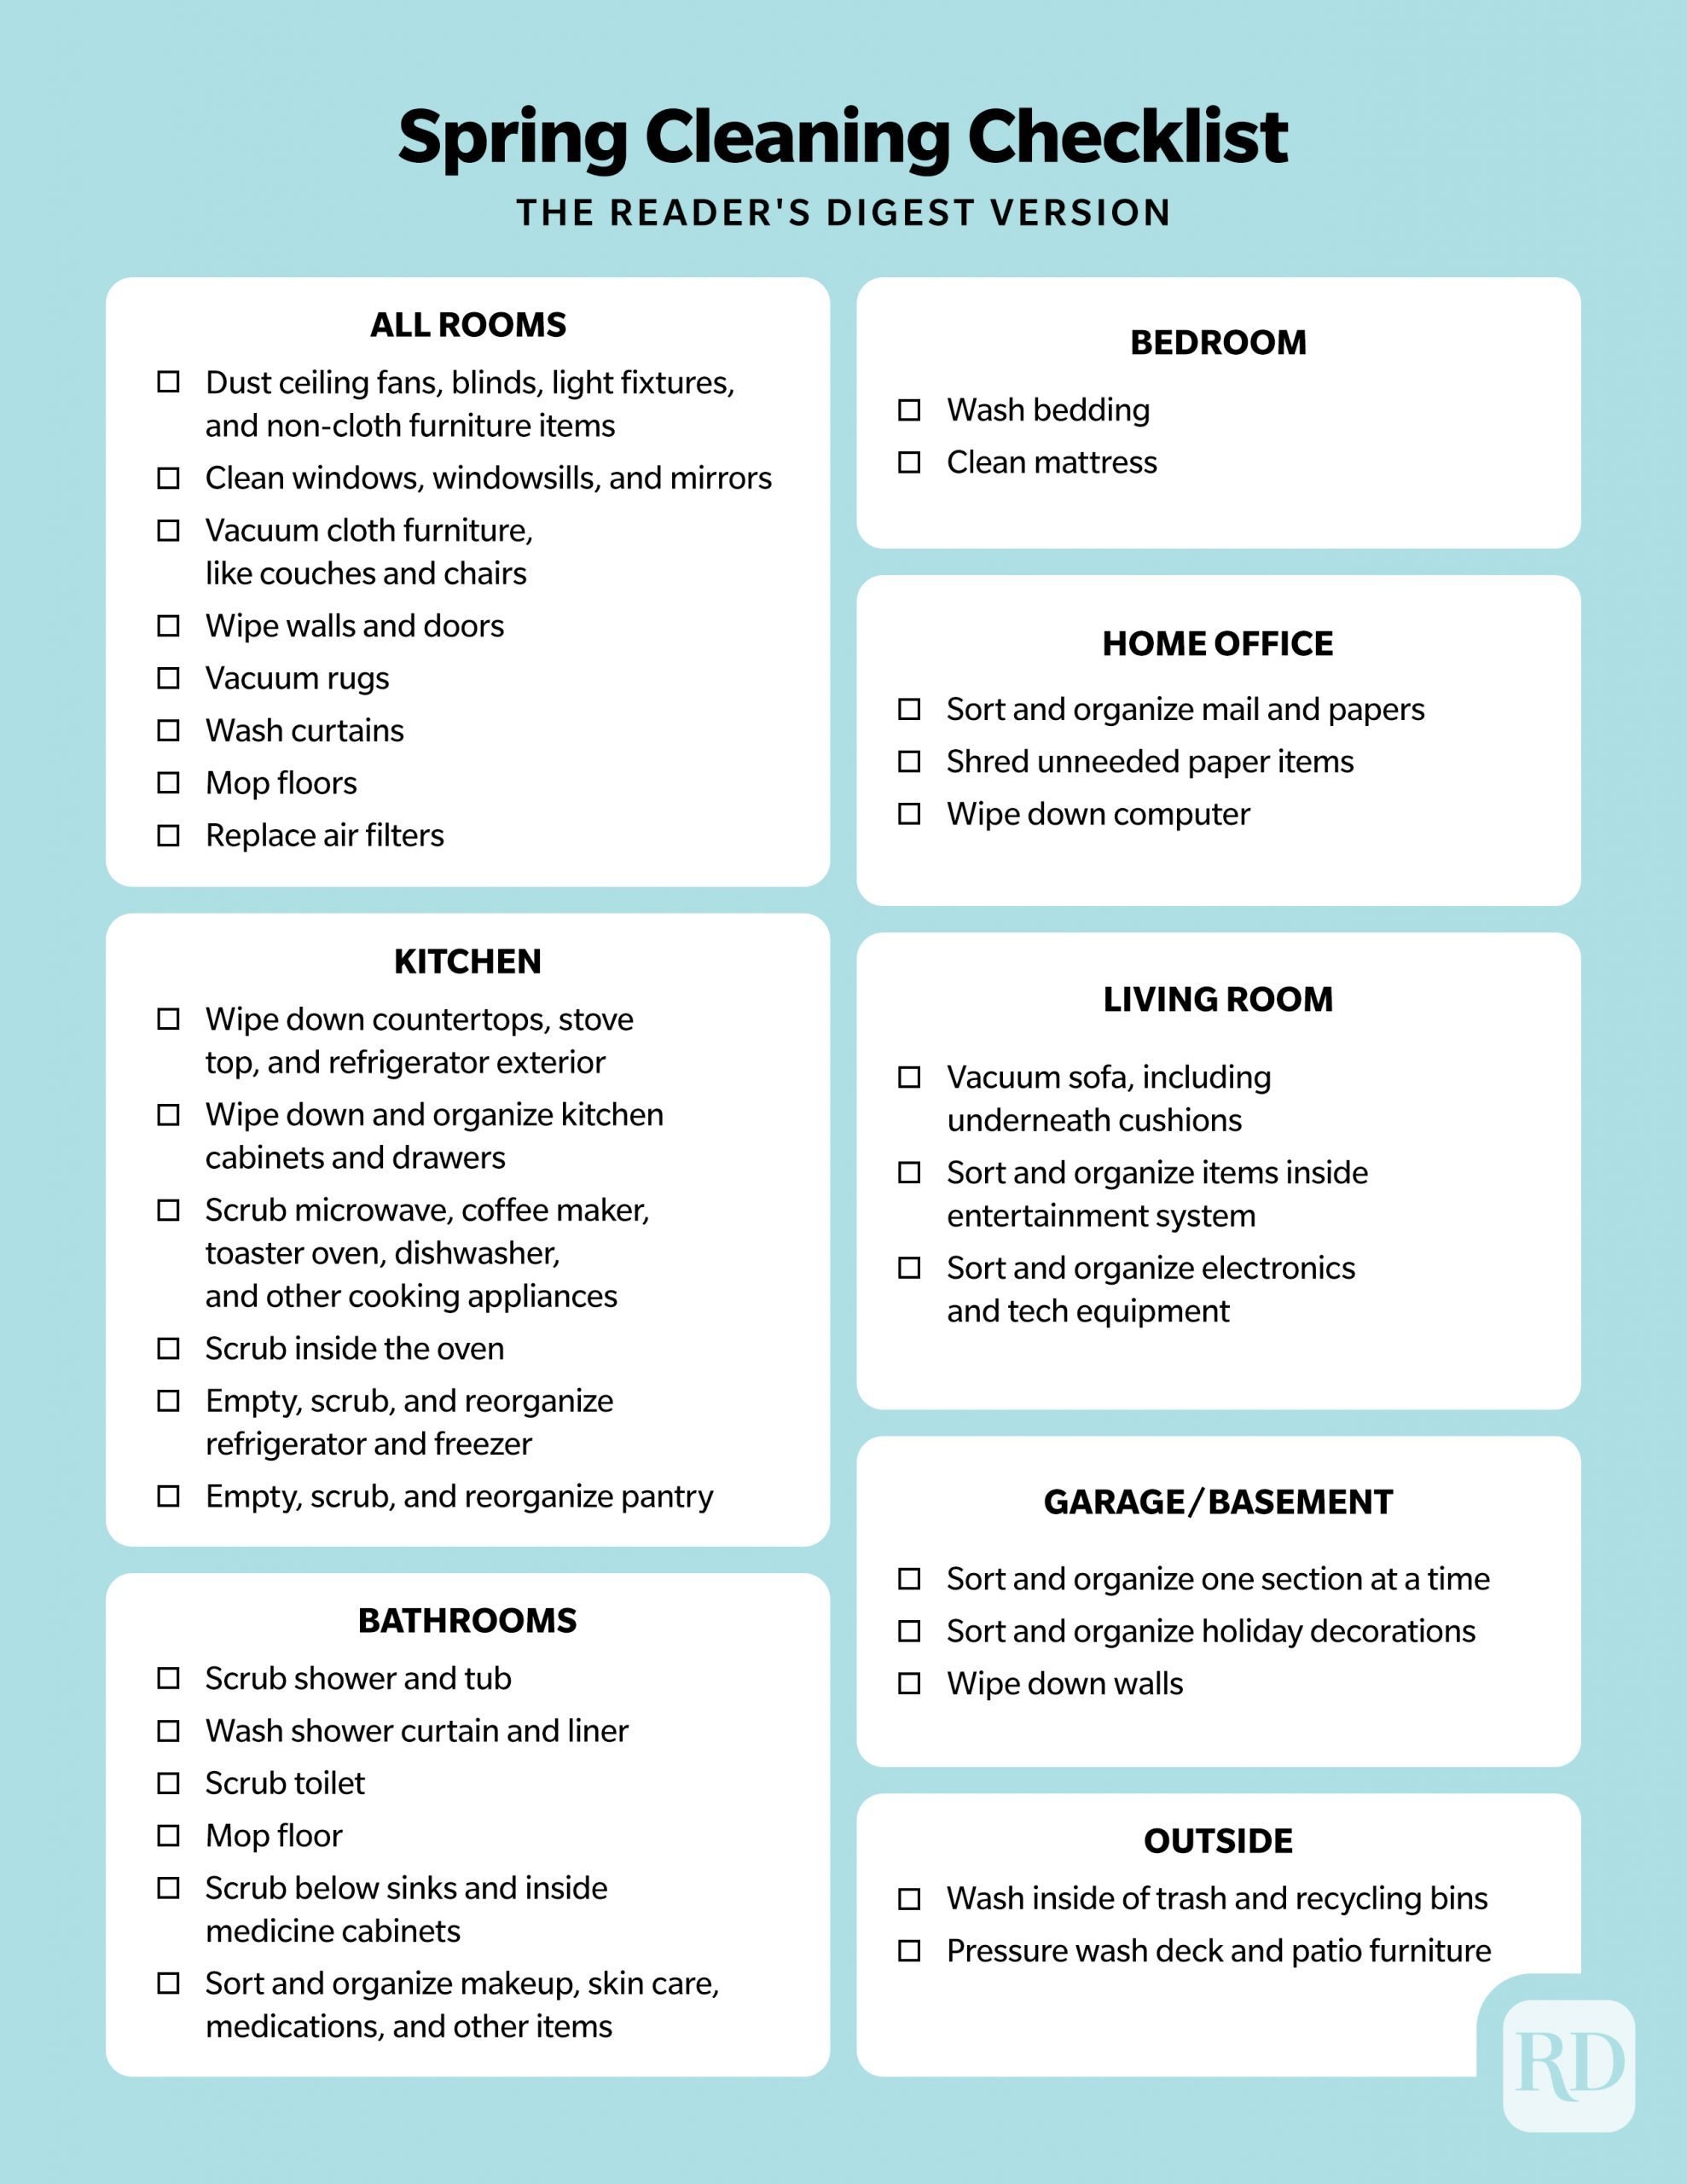 31 Spring Cleaning Tips from the Experts — Spring Cleaning Checklist